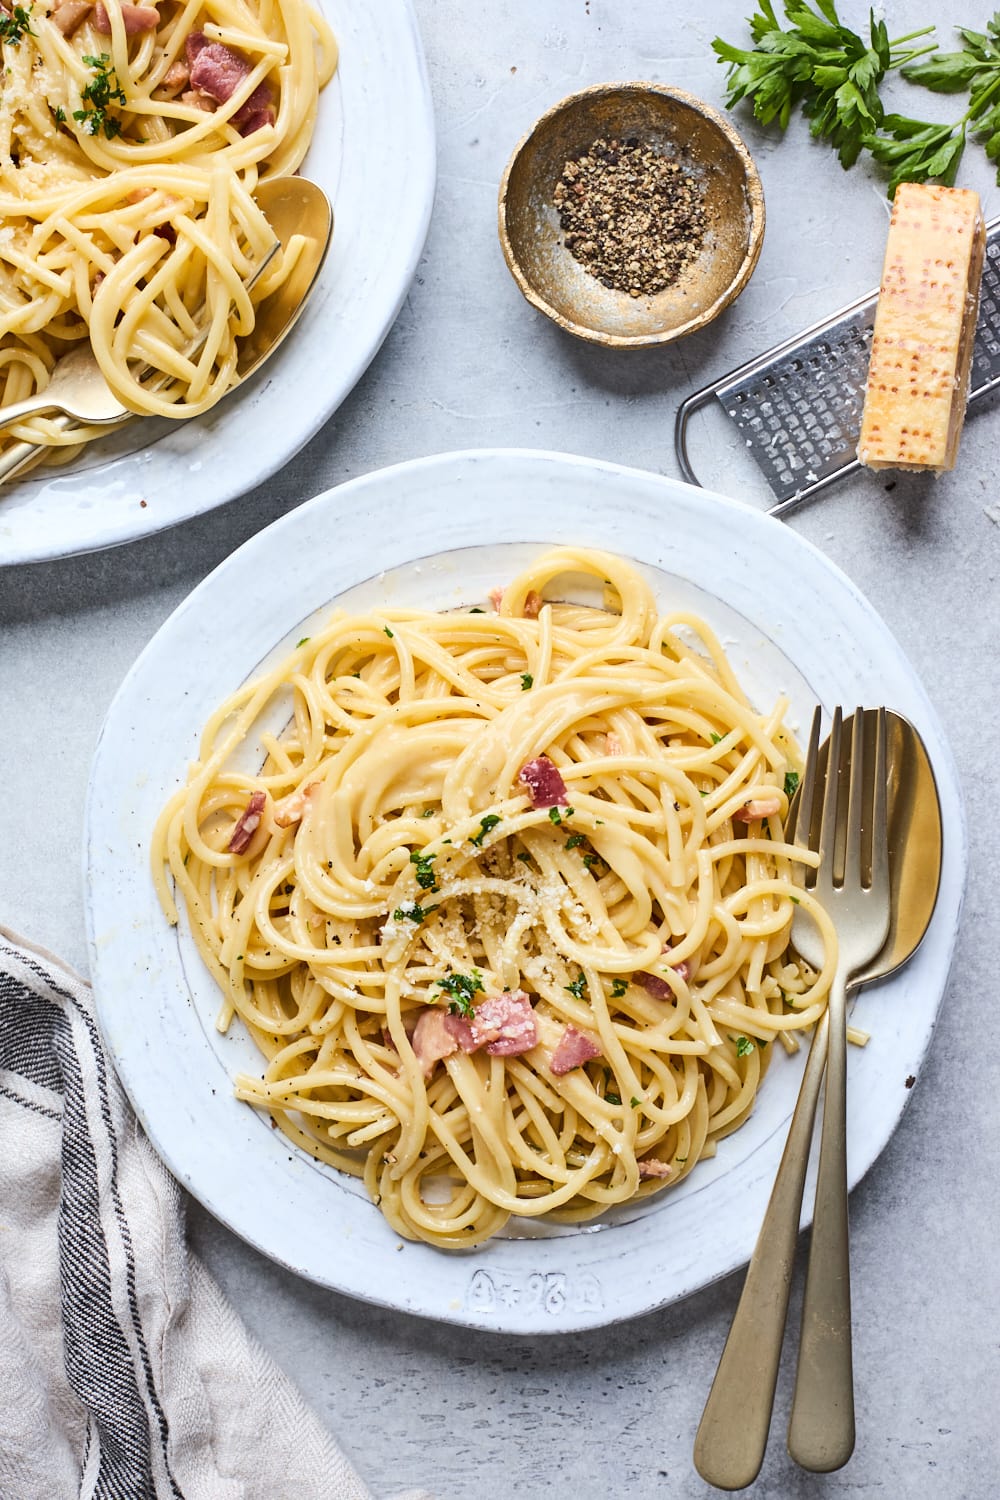 spaghetti carbonara on plate with fork and spoon with small bowl of freshly cracked black pepper in bowl and Parmesan cheese.